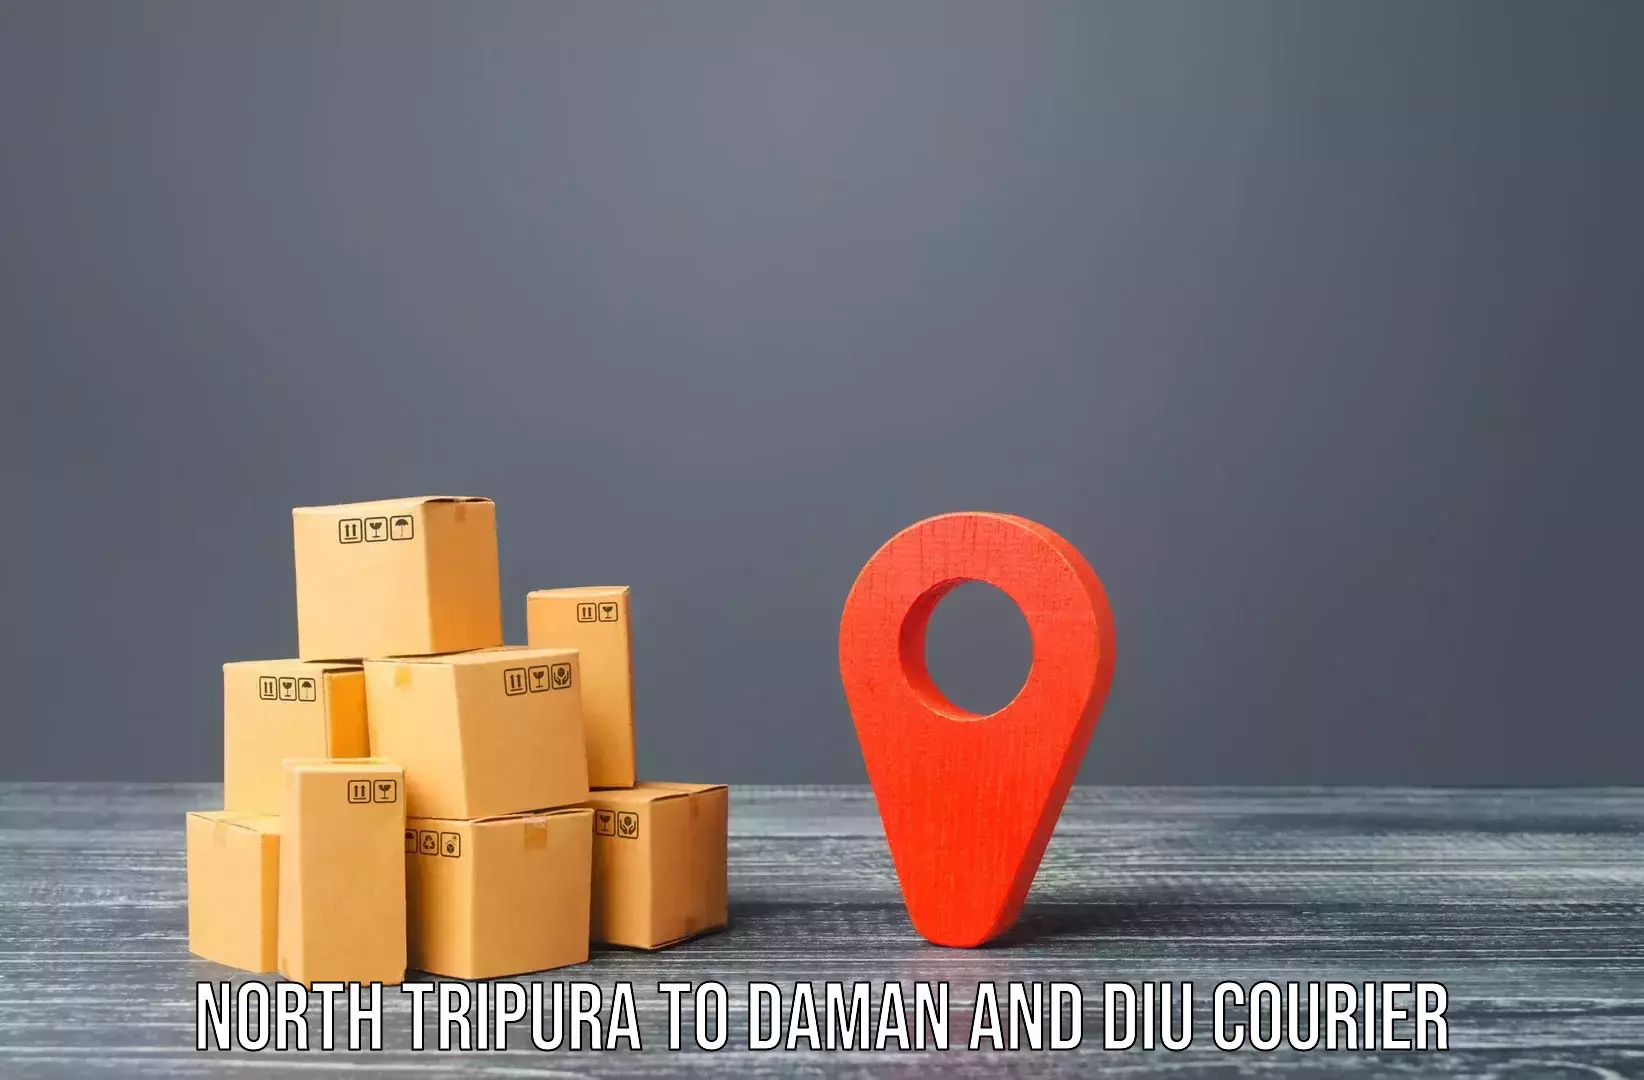 Professional movers and packers North Tripura to Daman